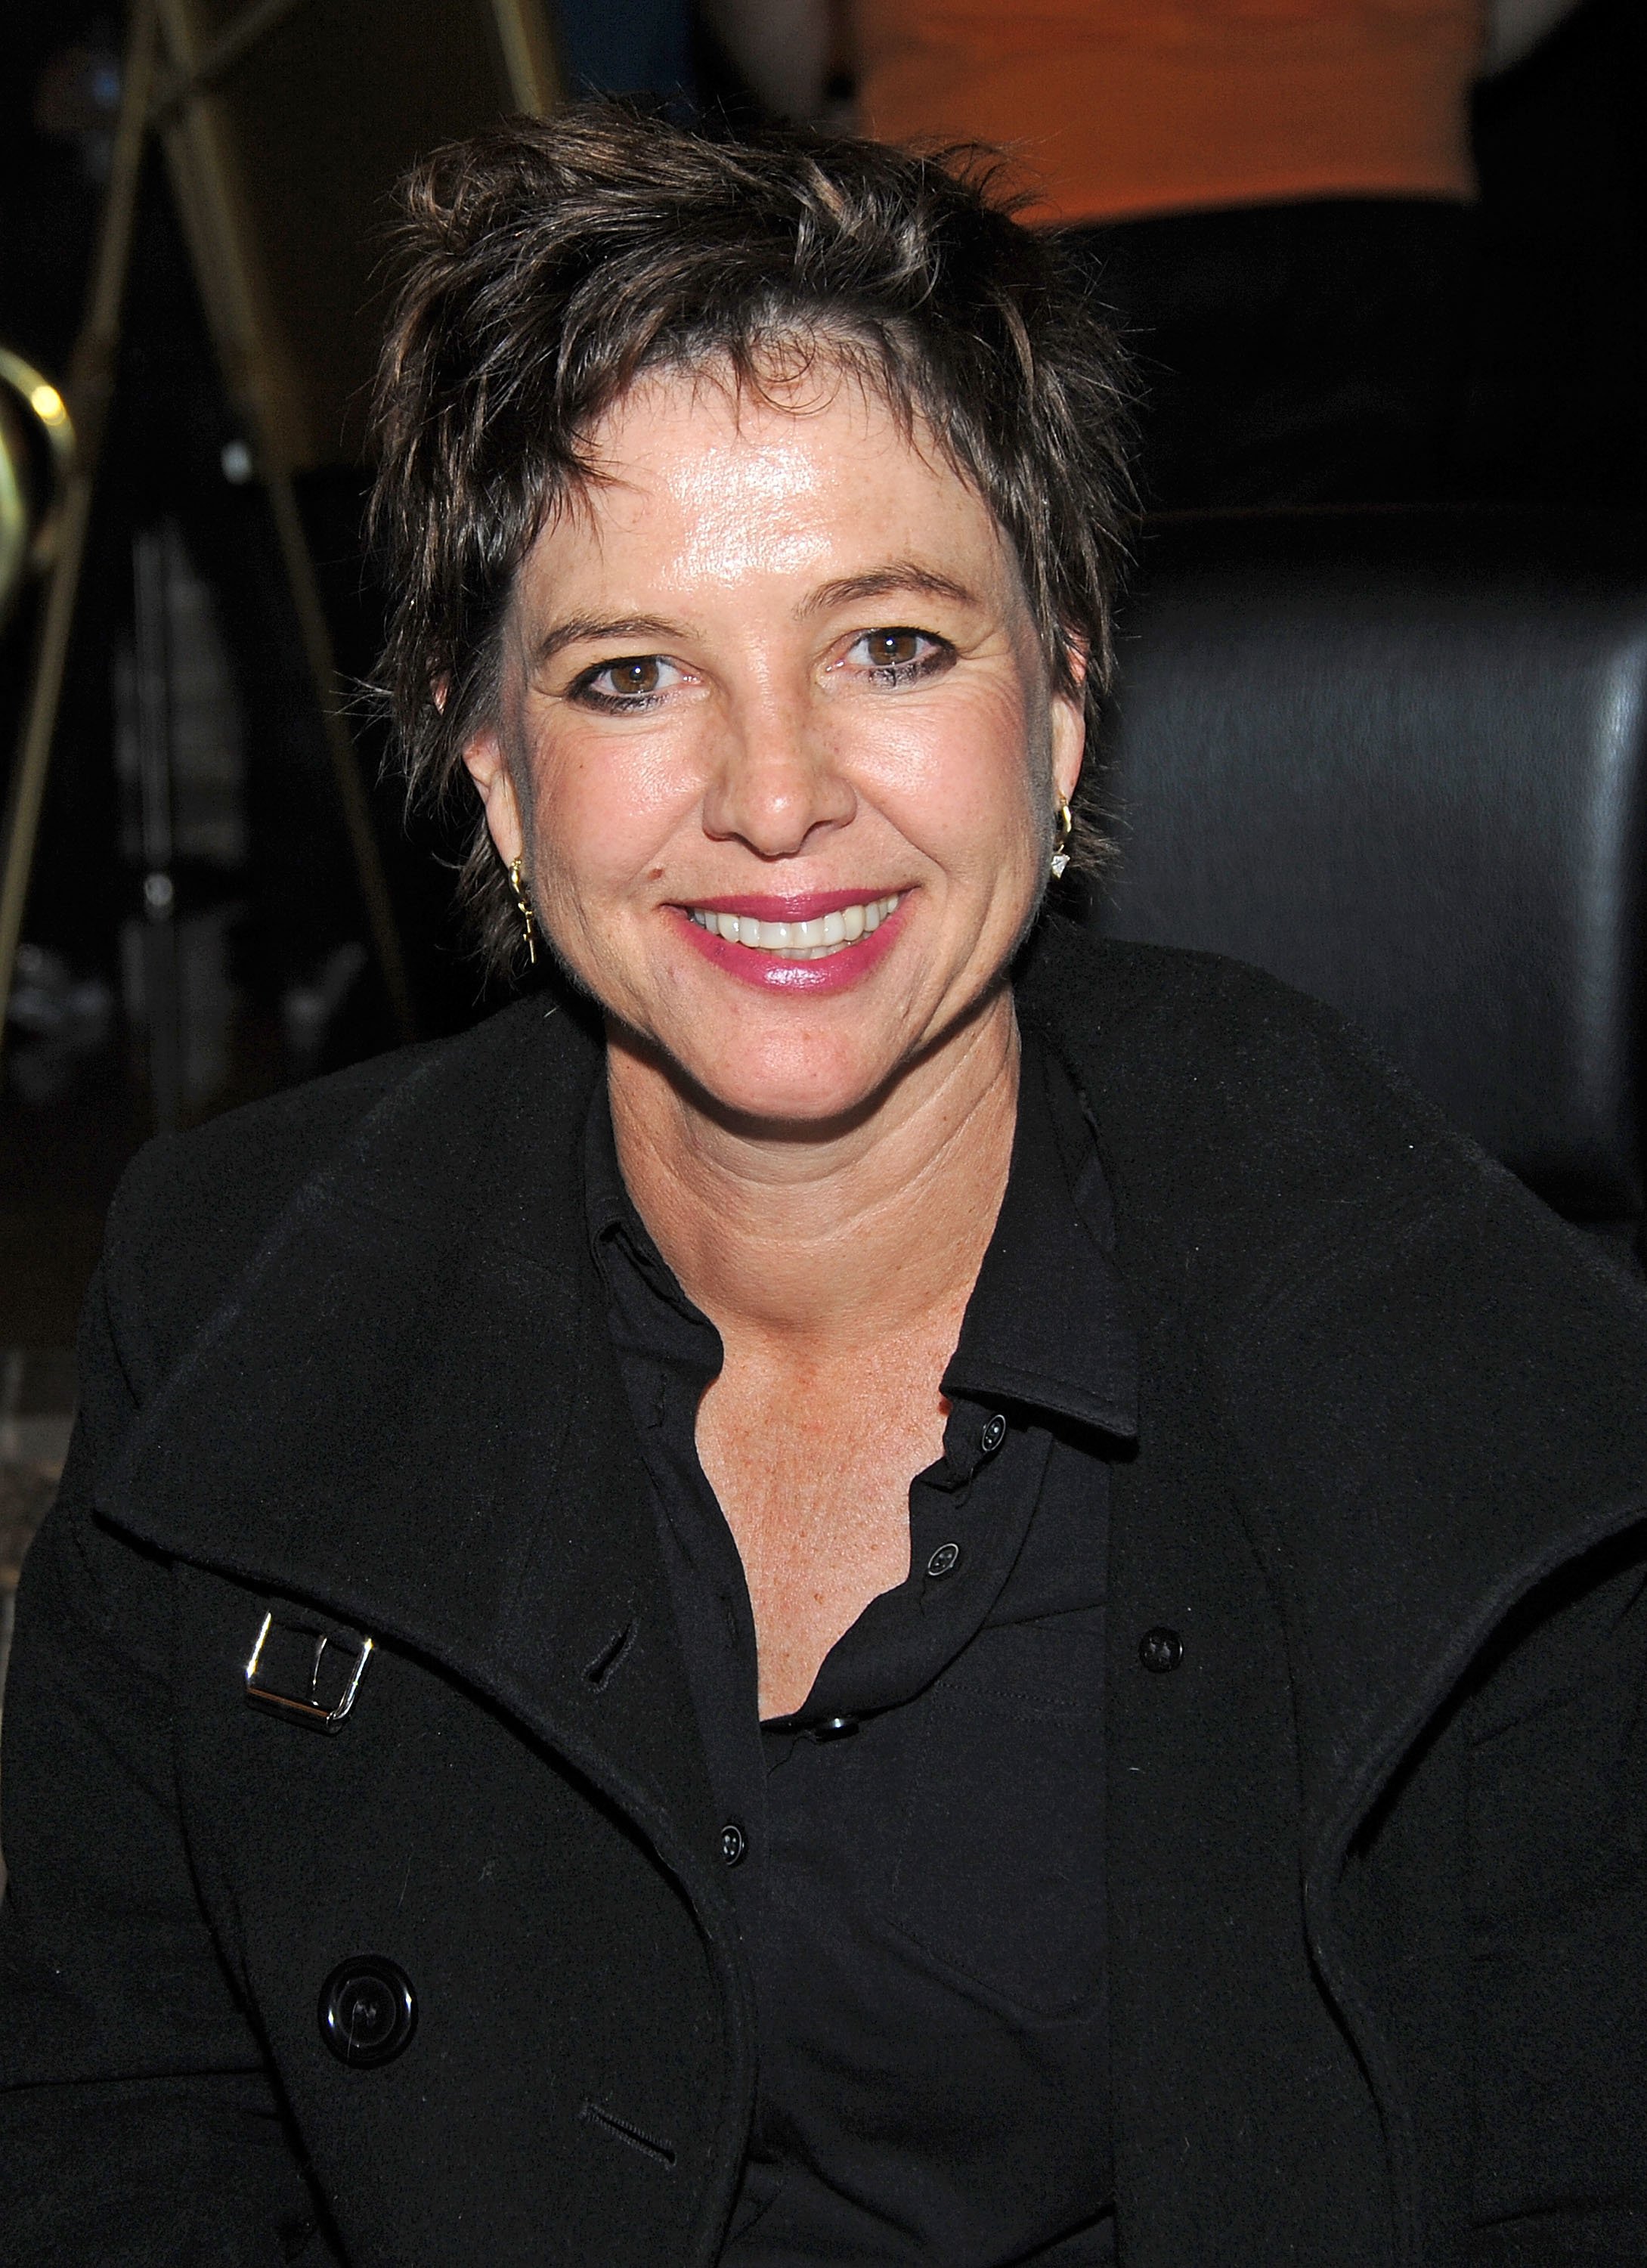 Kristy McNichol attends Day 1 of the 2010 Chiller Theatre Expo at Hilton in Parsippany, New Jersey | Photo: Getty Images